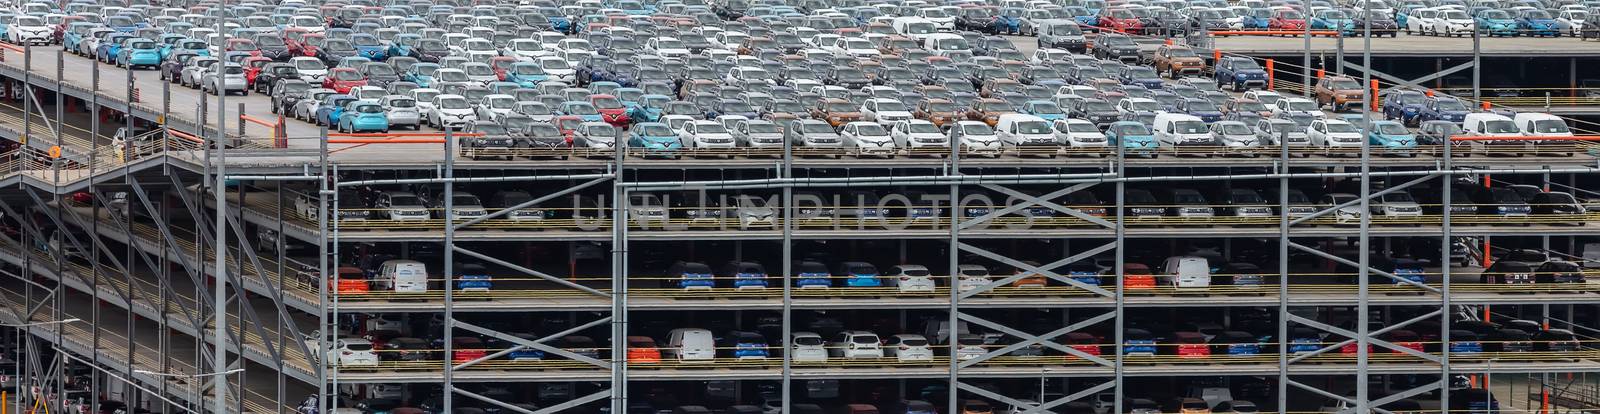 Southampton port, England, UK - June 08, 2020: Multilevel parking lot, storage facility in the port of Southampton. Full of various imported cars. Aerial view.